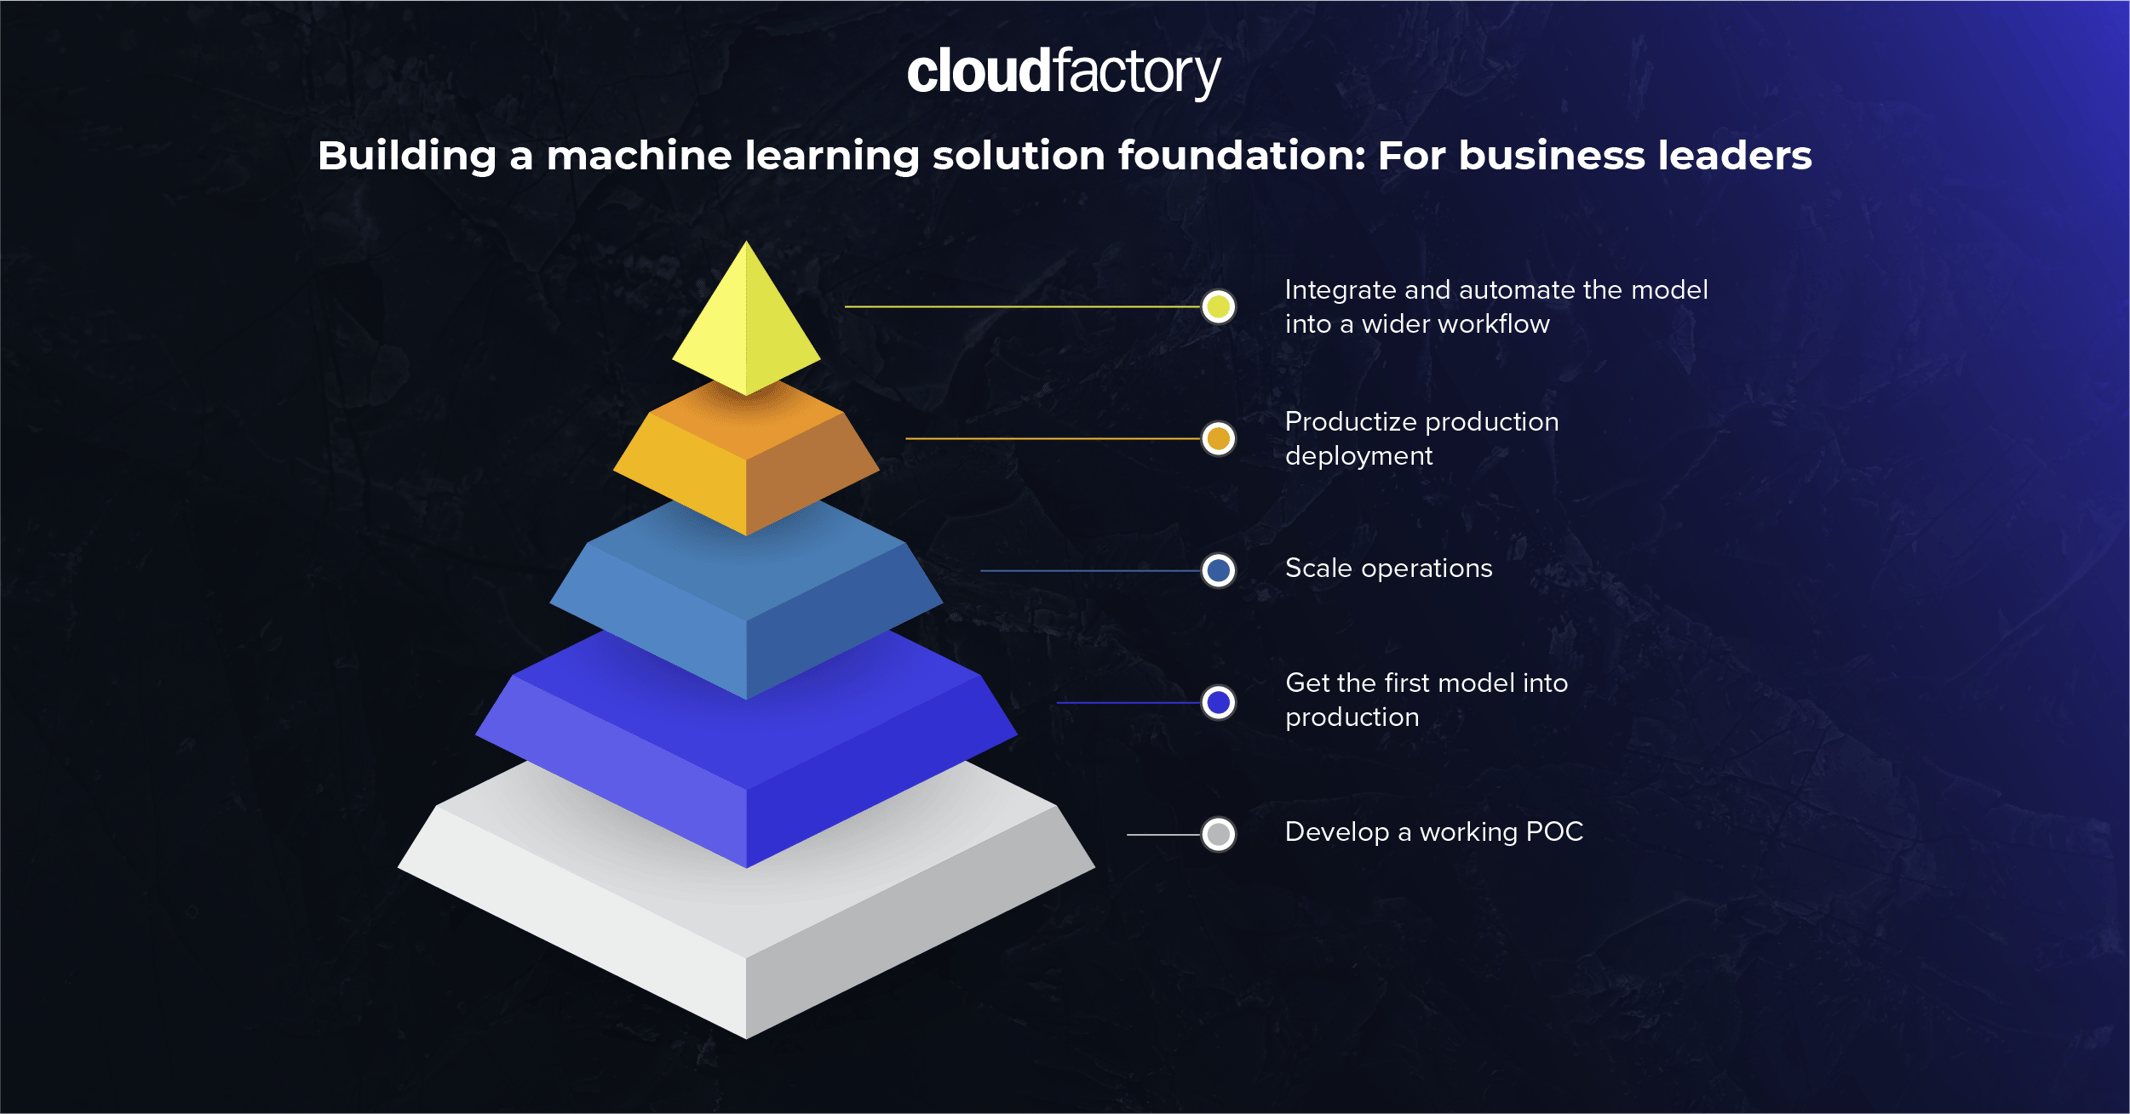 An image depicting the machine learning solution foundation for business leaders.